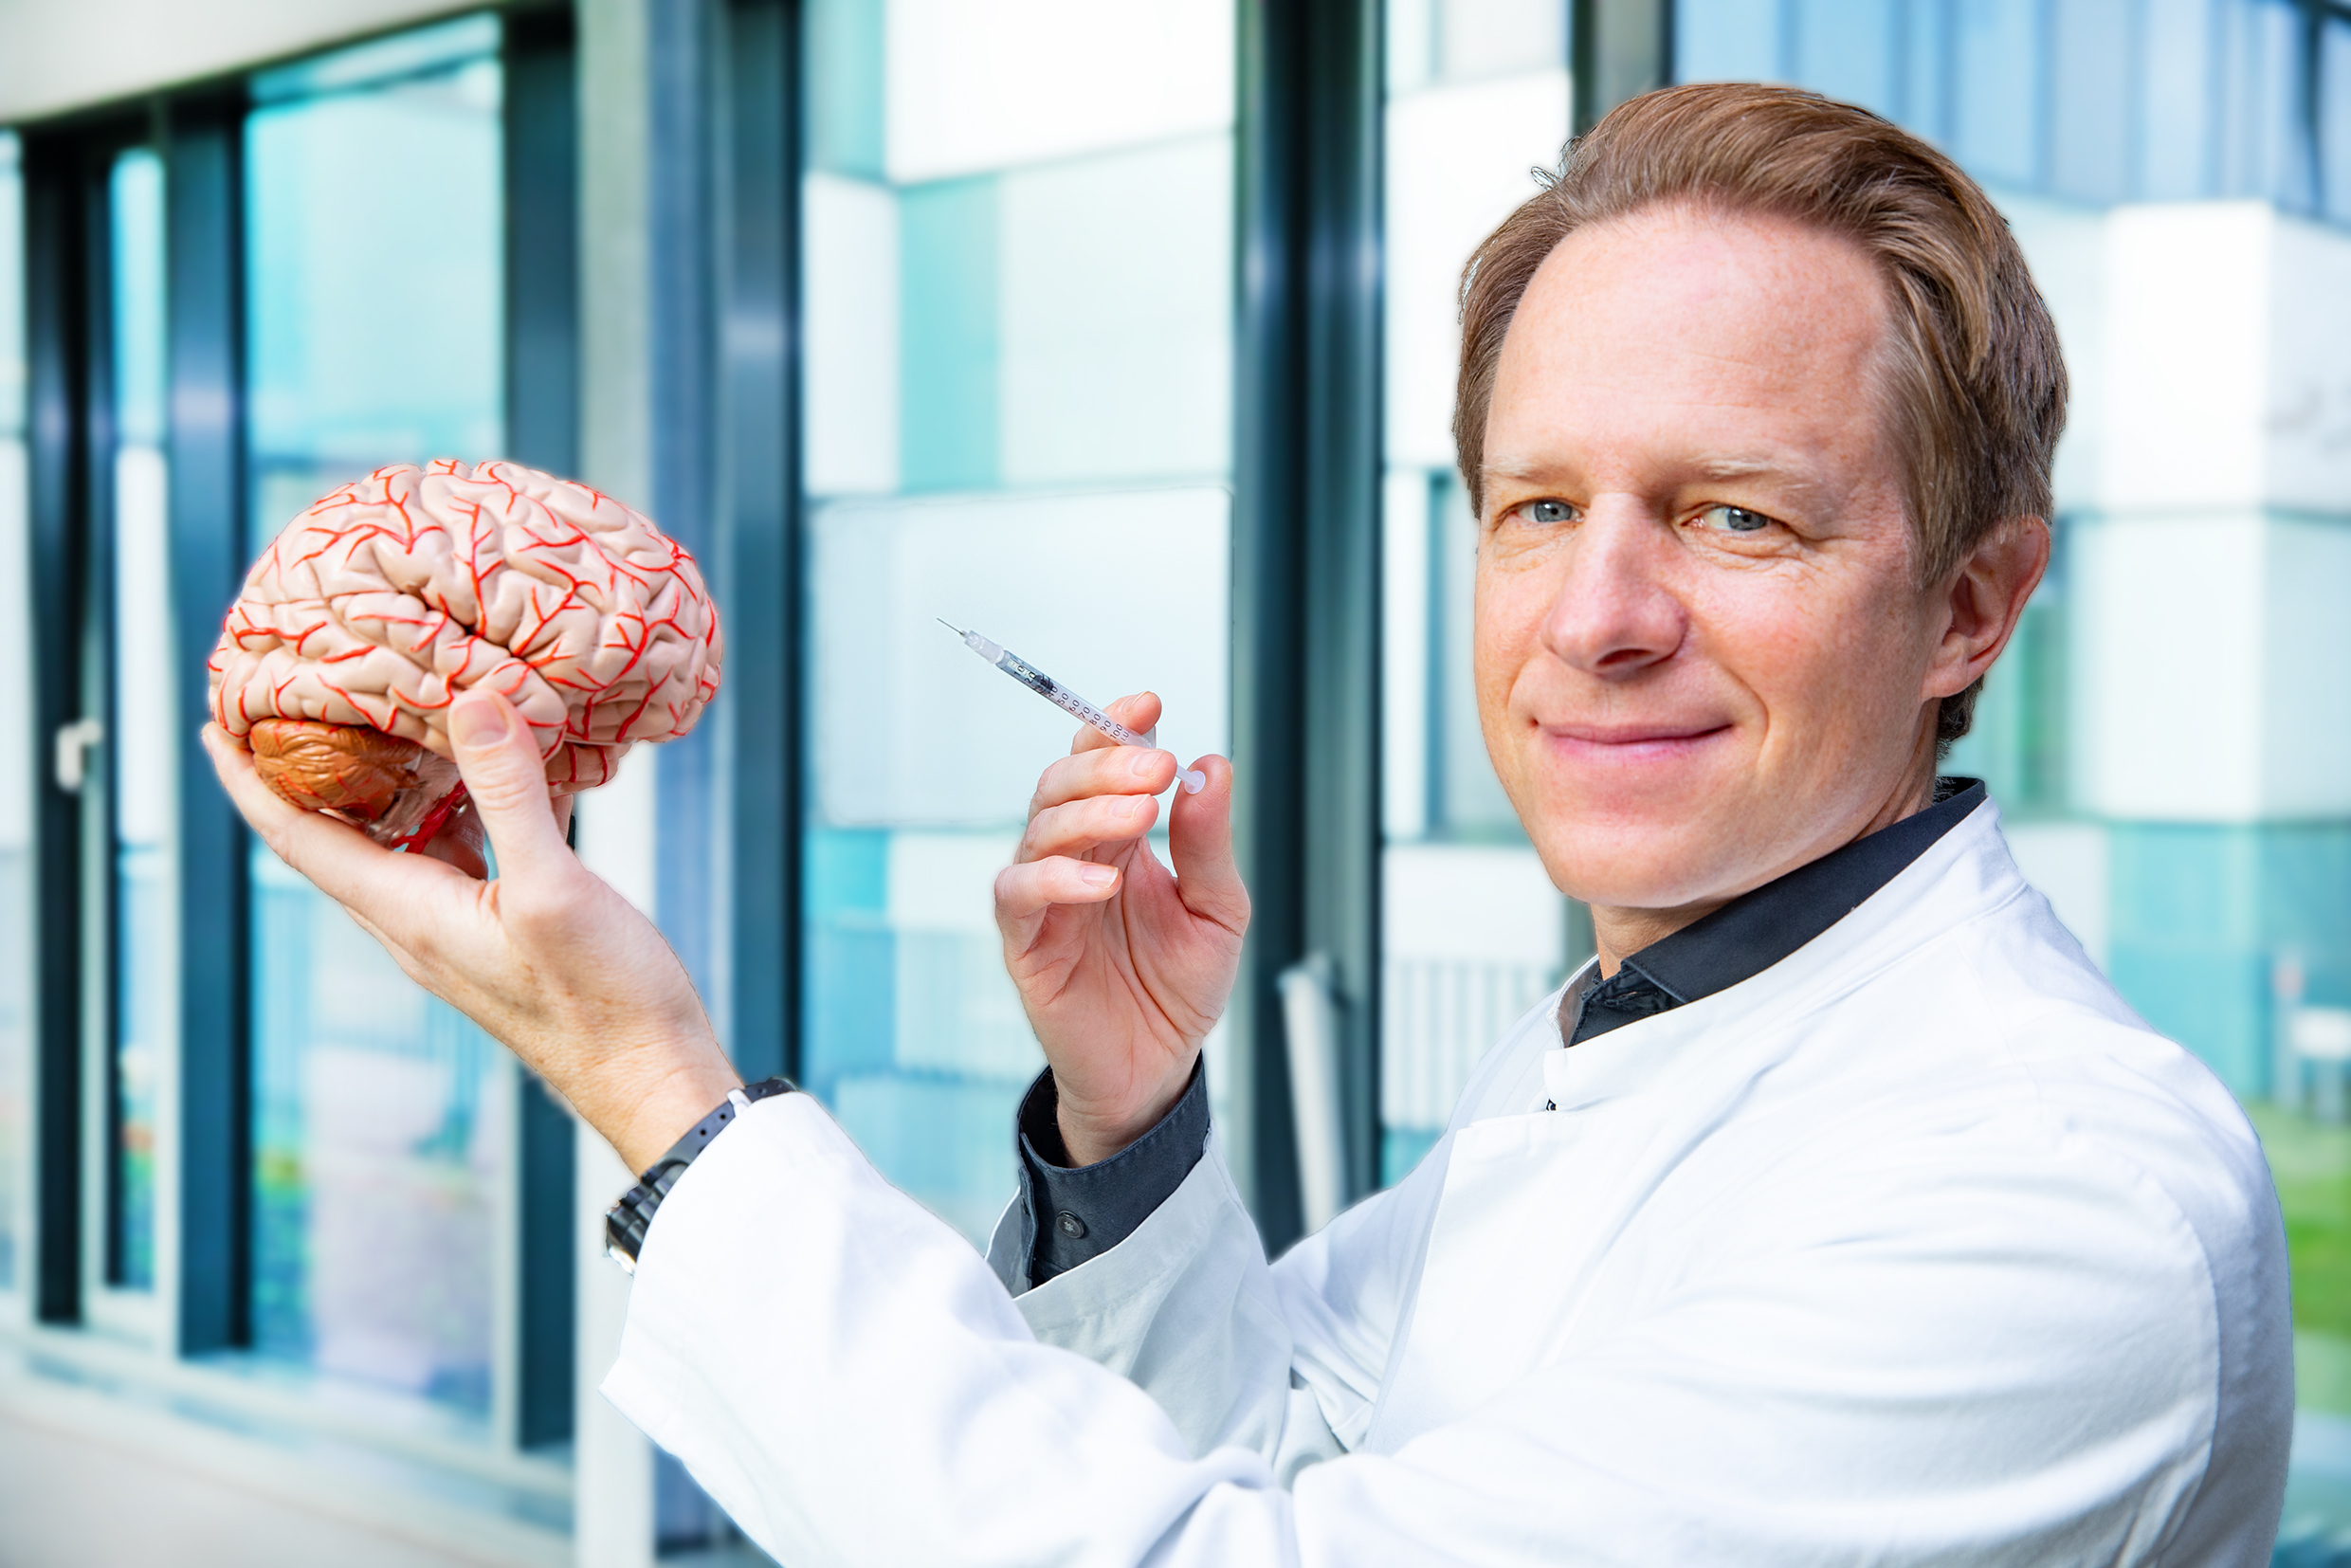 Professor Dr Tillmann Krüger holds a model of a human brain and a syringe in his hands.